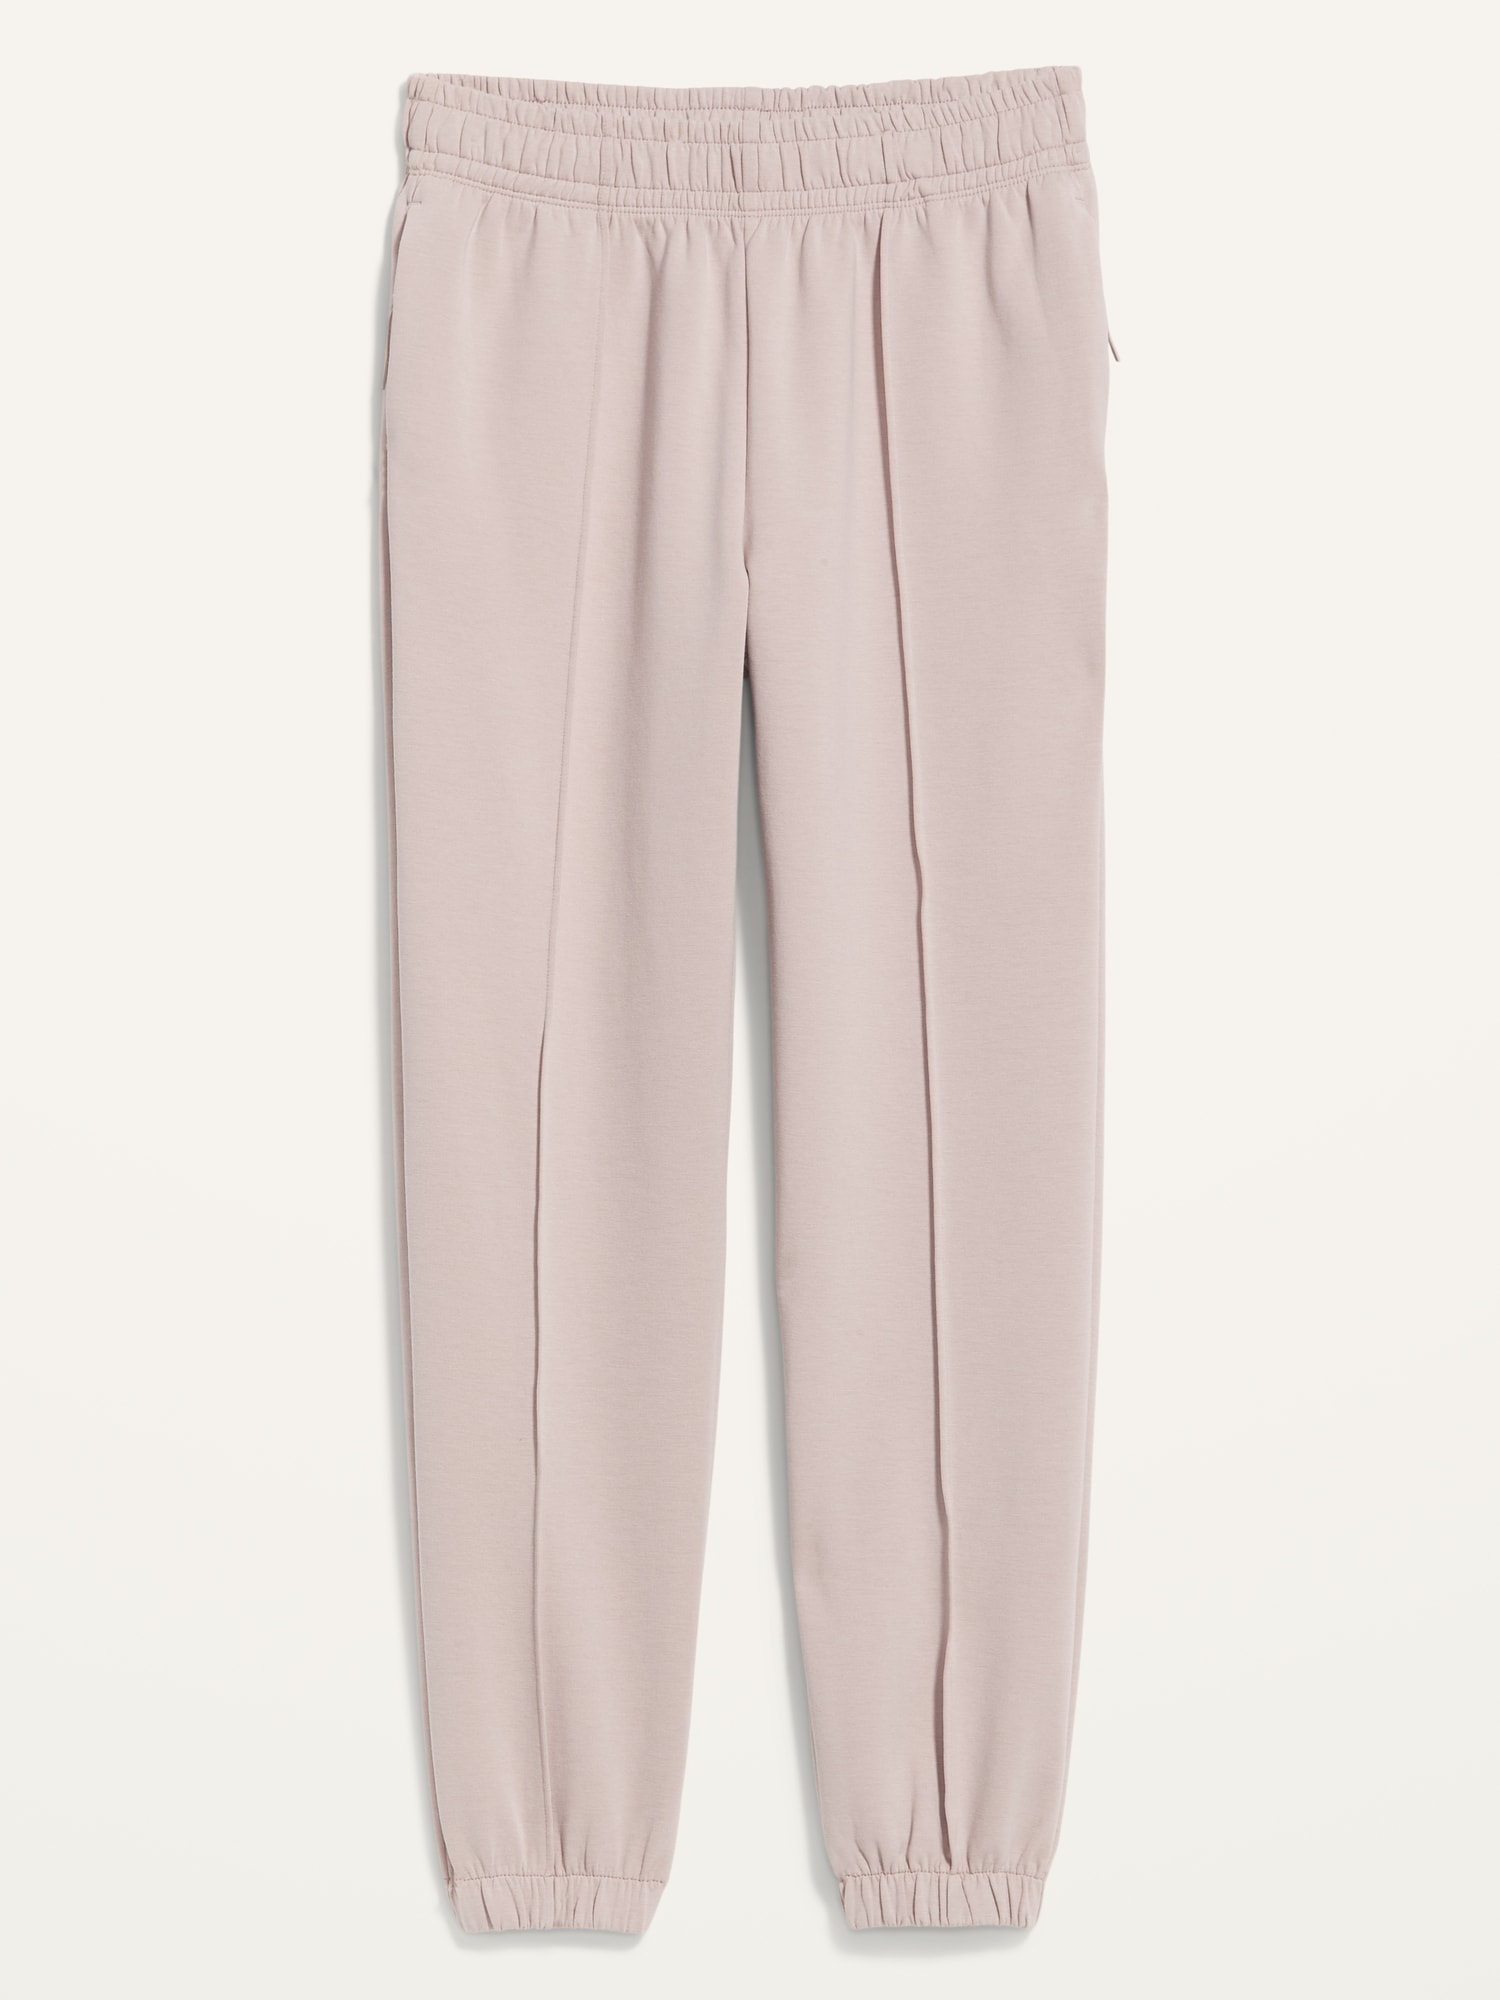 Old Navy Women's Dynamic Fleece Pintucked Sweatpants (various) only $15.00